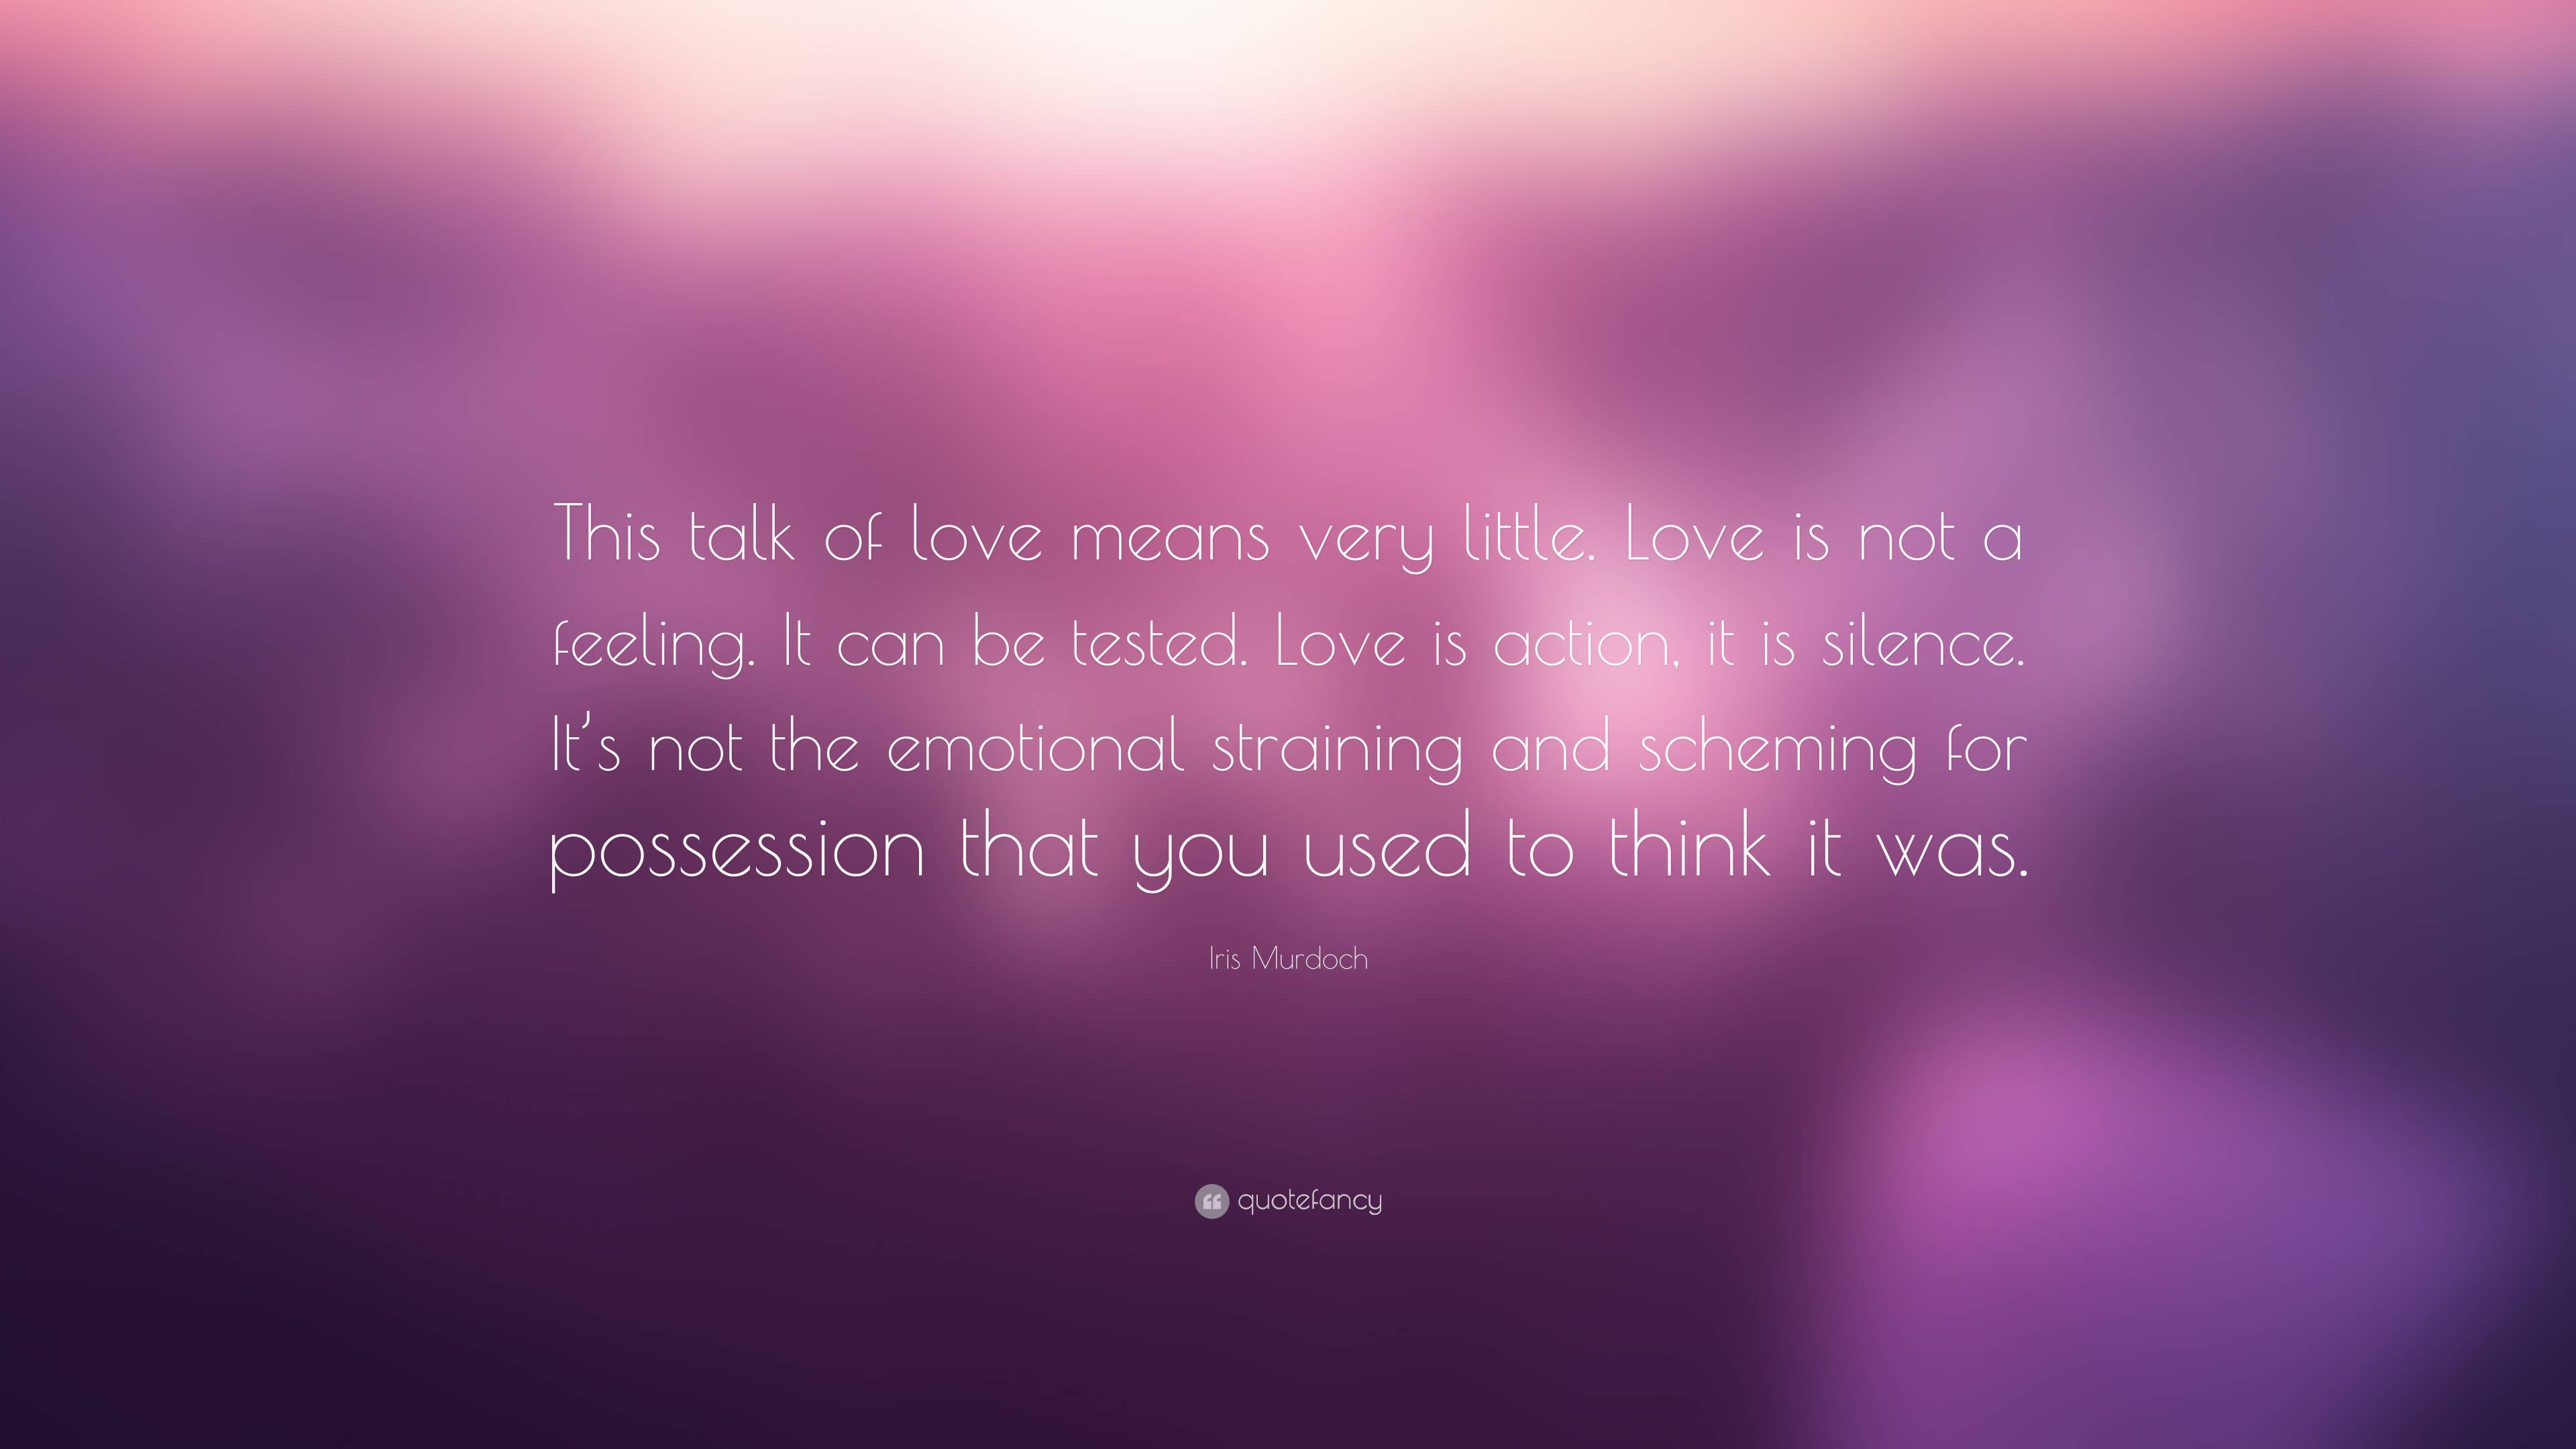 Iris Murdoch Quote: “This talk of love means very little. Love is not a ...